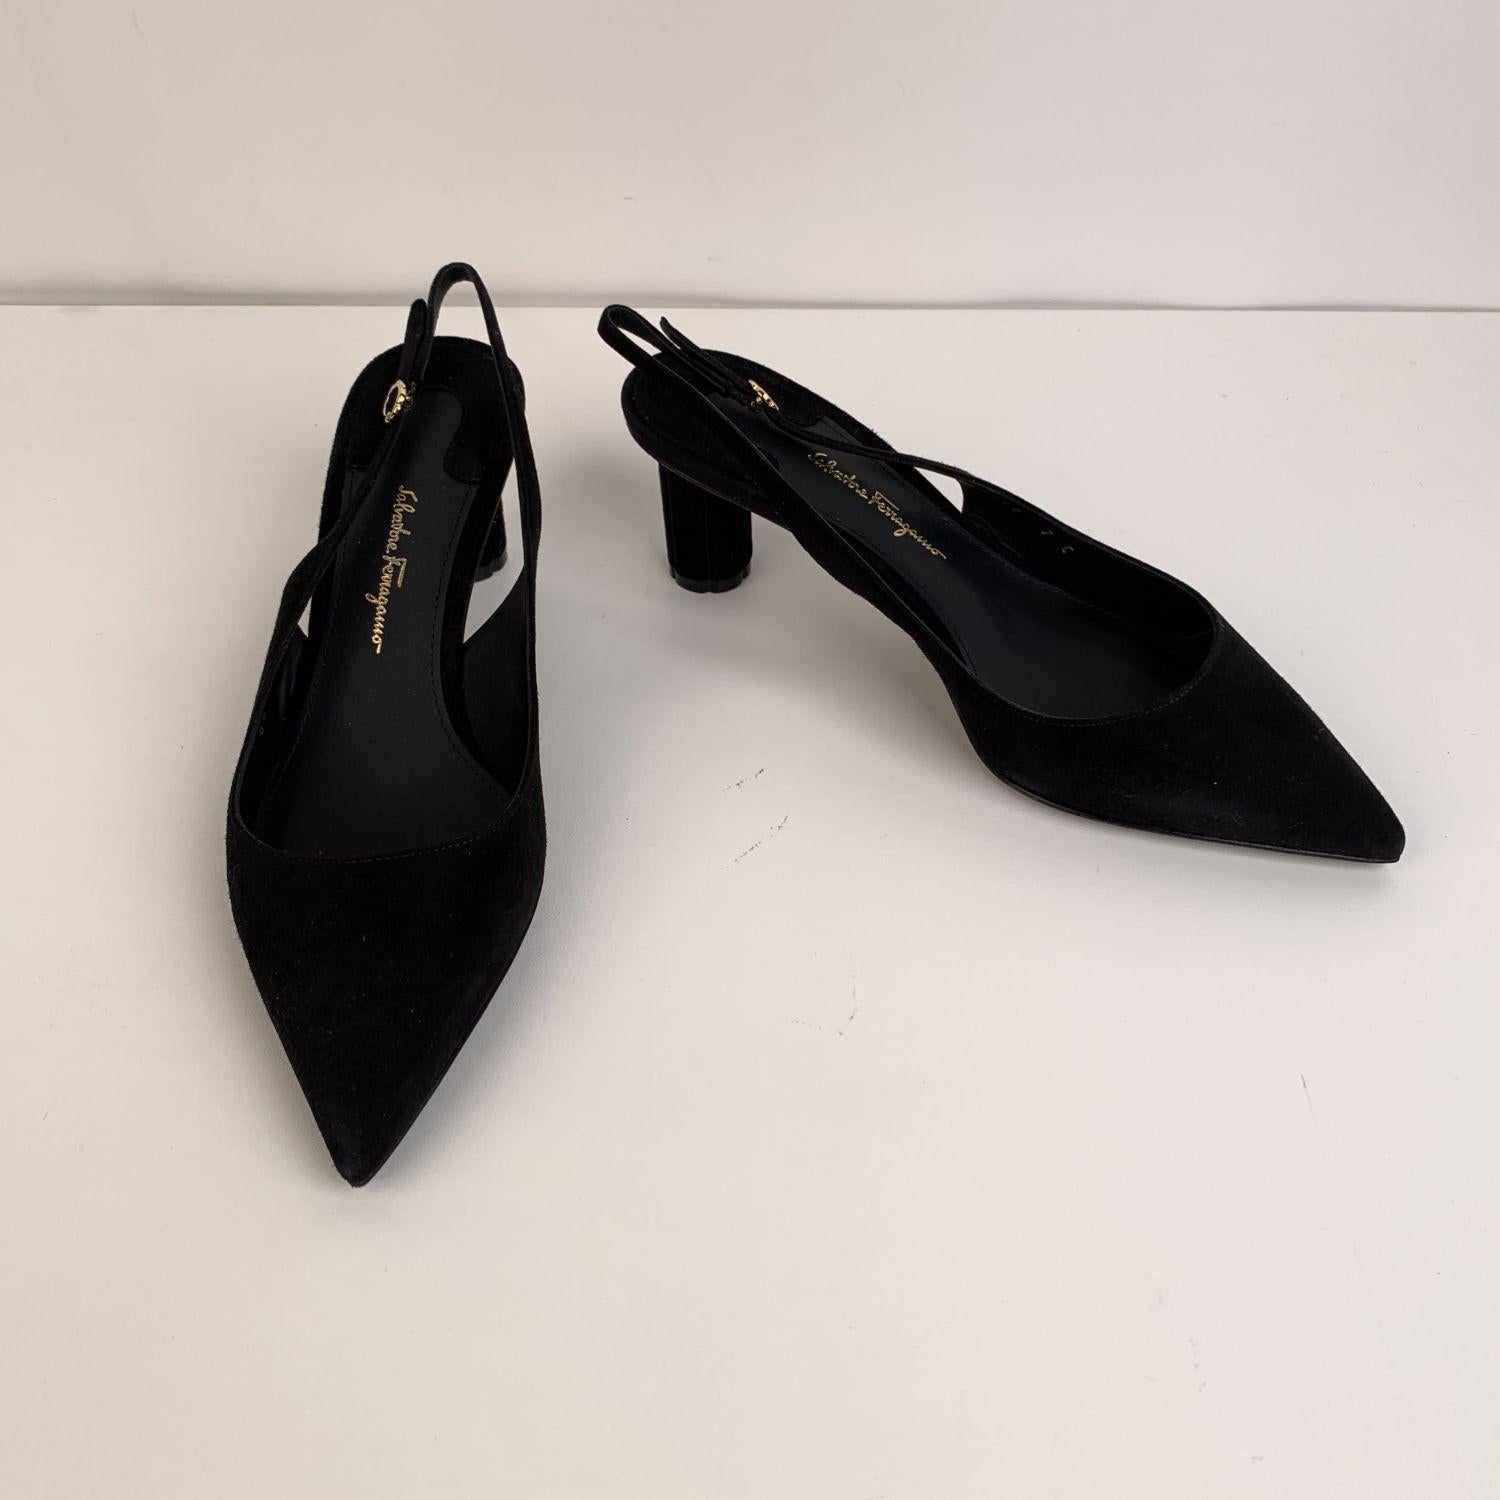 Beautiful Salvatore Ferragamo Buti 55 Slingback pumps. Crafted in black suede, they feature a pointed toe, adjustable ankle strap and block flower-shaped covered heel. Leather sole. Heels Height: 2.1 inches - 5.5 cm. Made in Italy. Size: US 7.5 C -